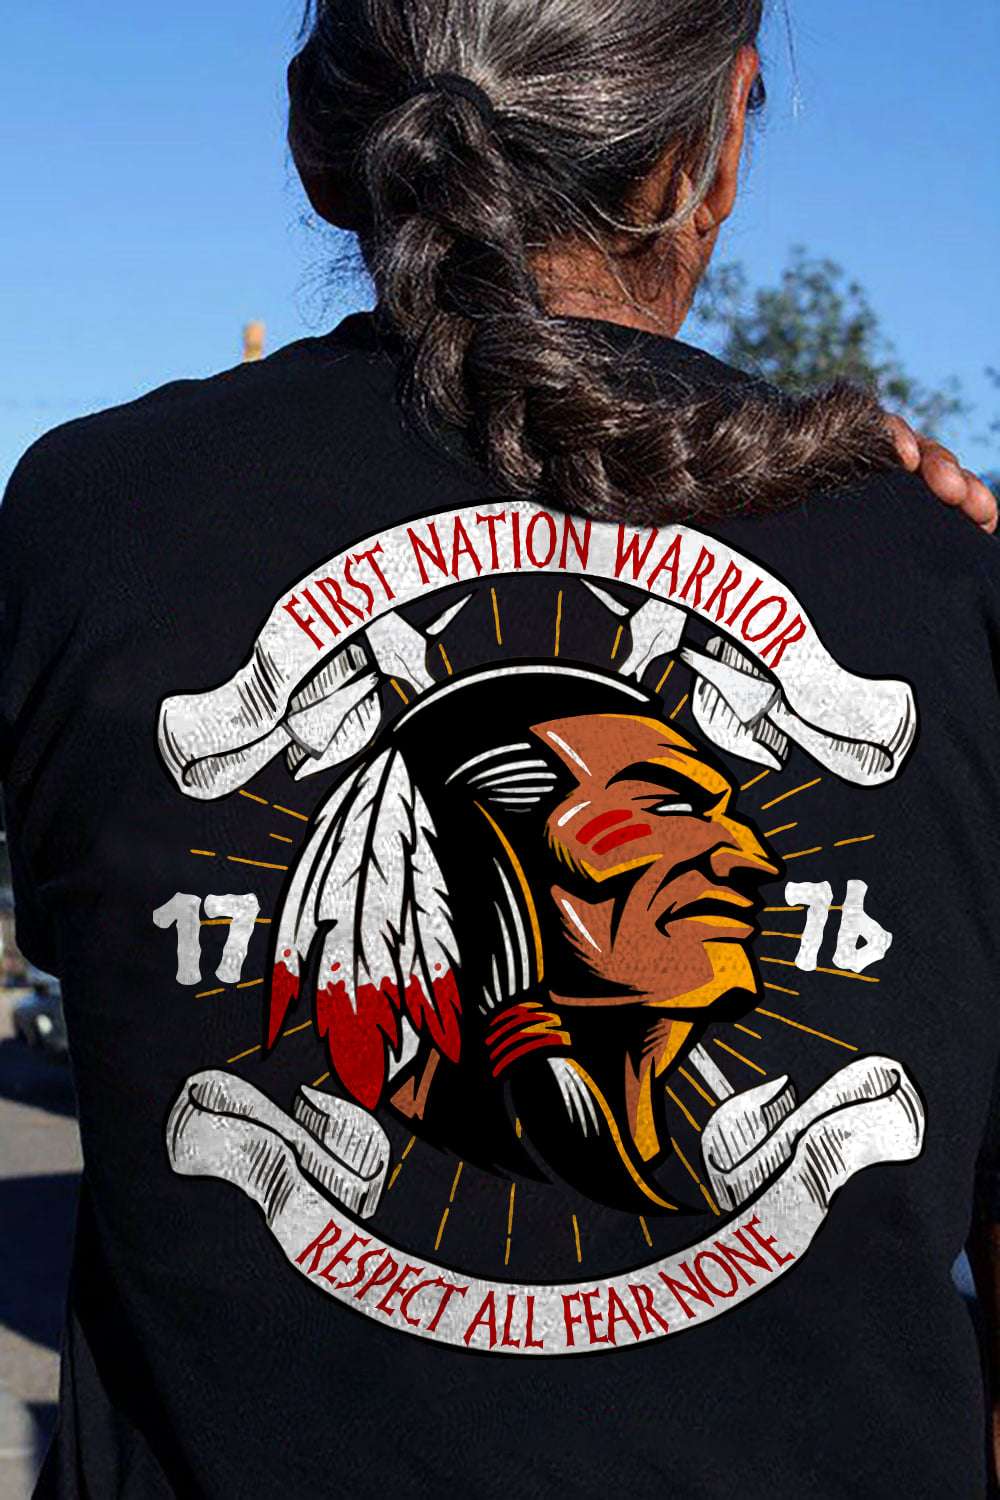 Native Warrior - First nation warrior respect all fear none